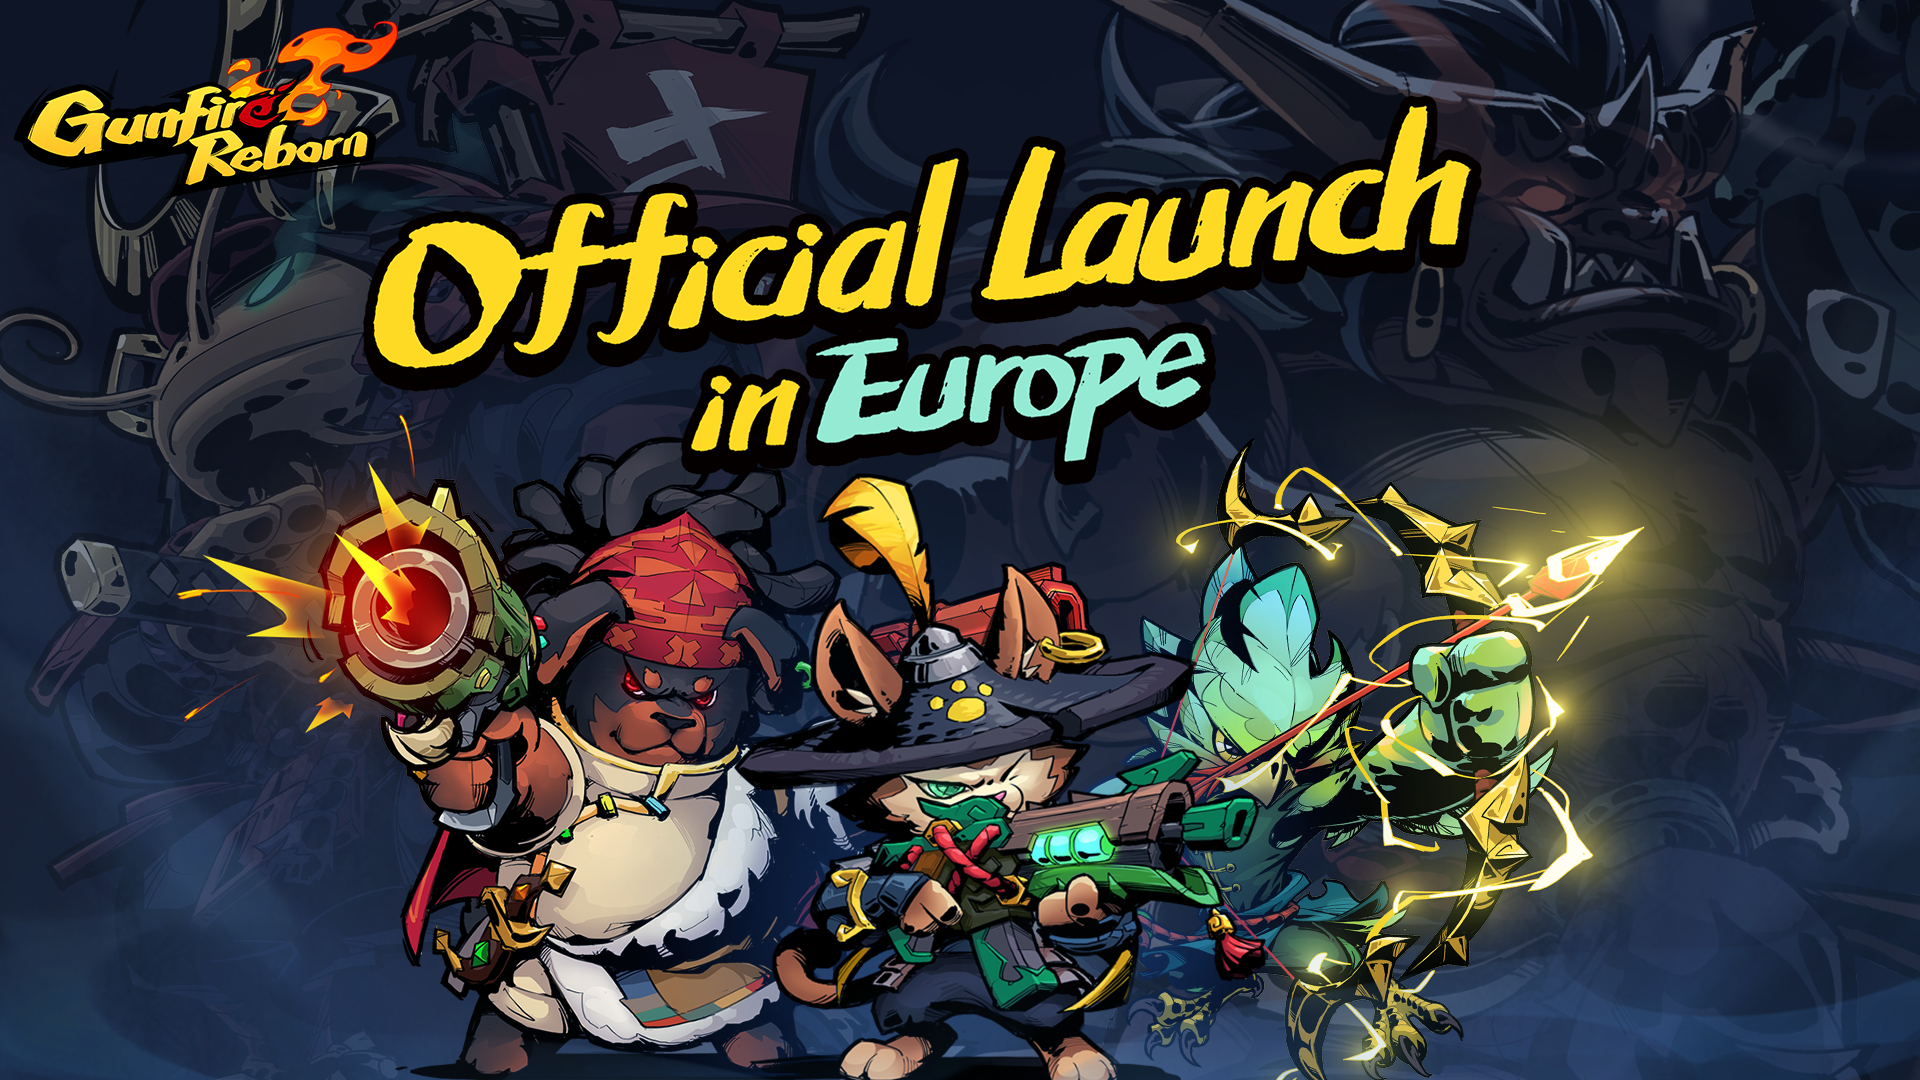 Gunfire Reborn Mobile Is Now Available in Europe